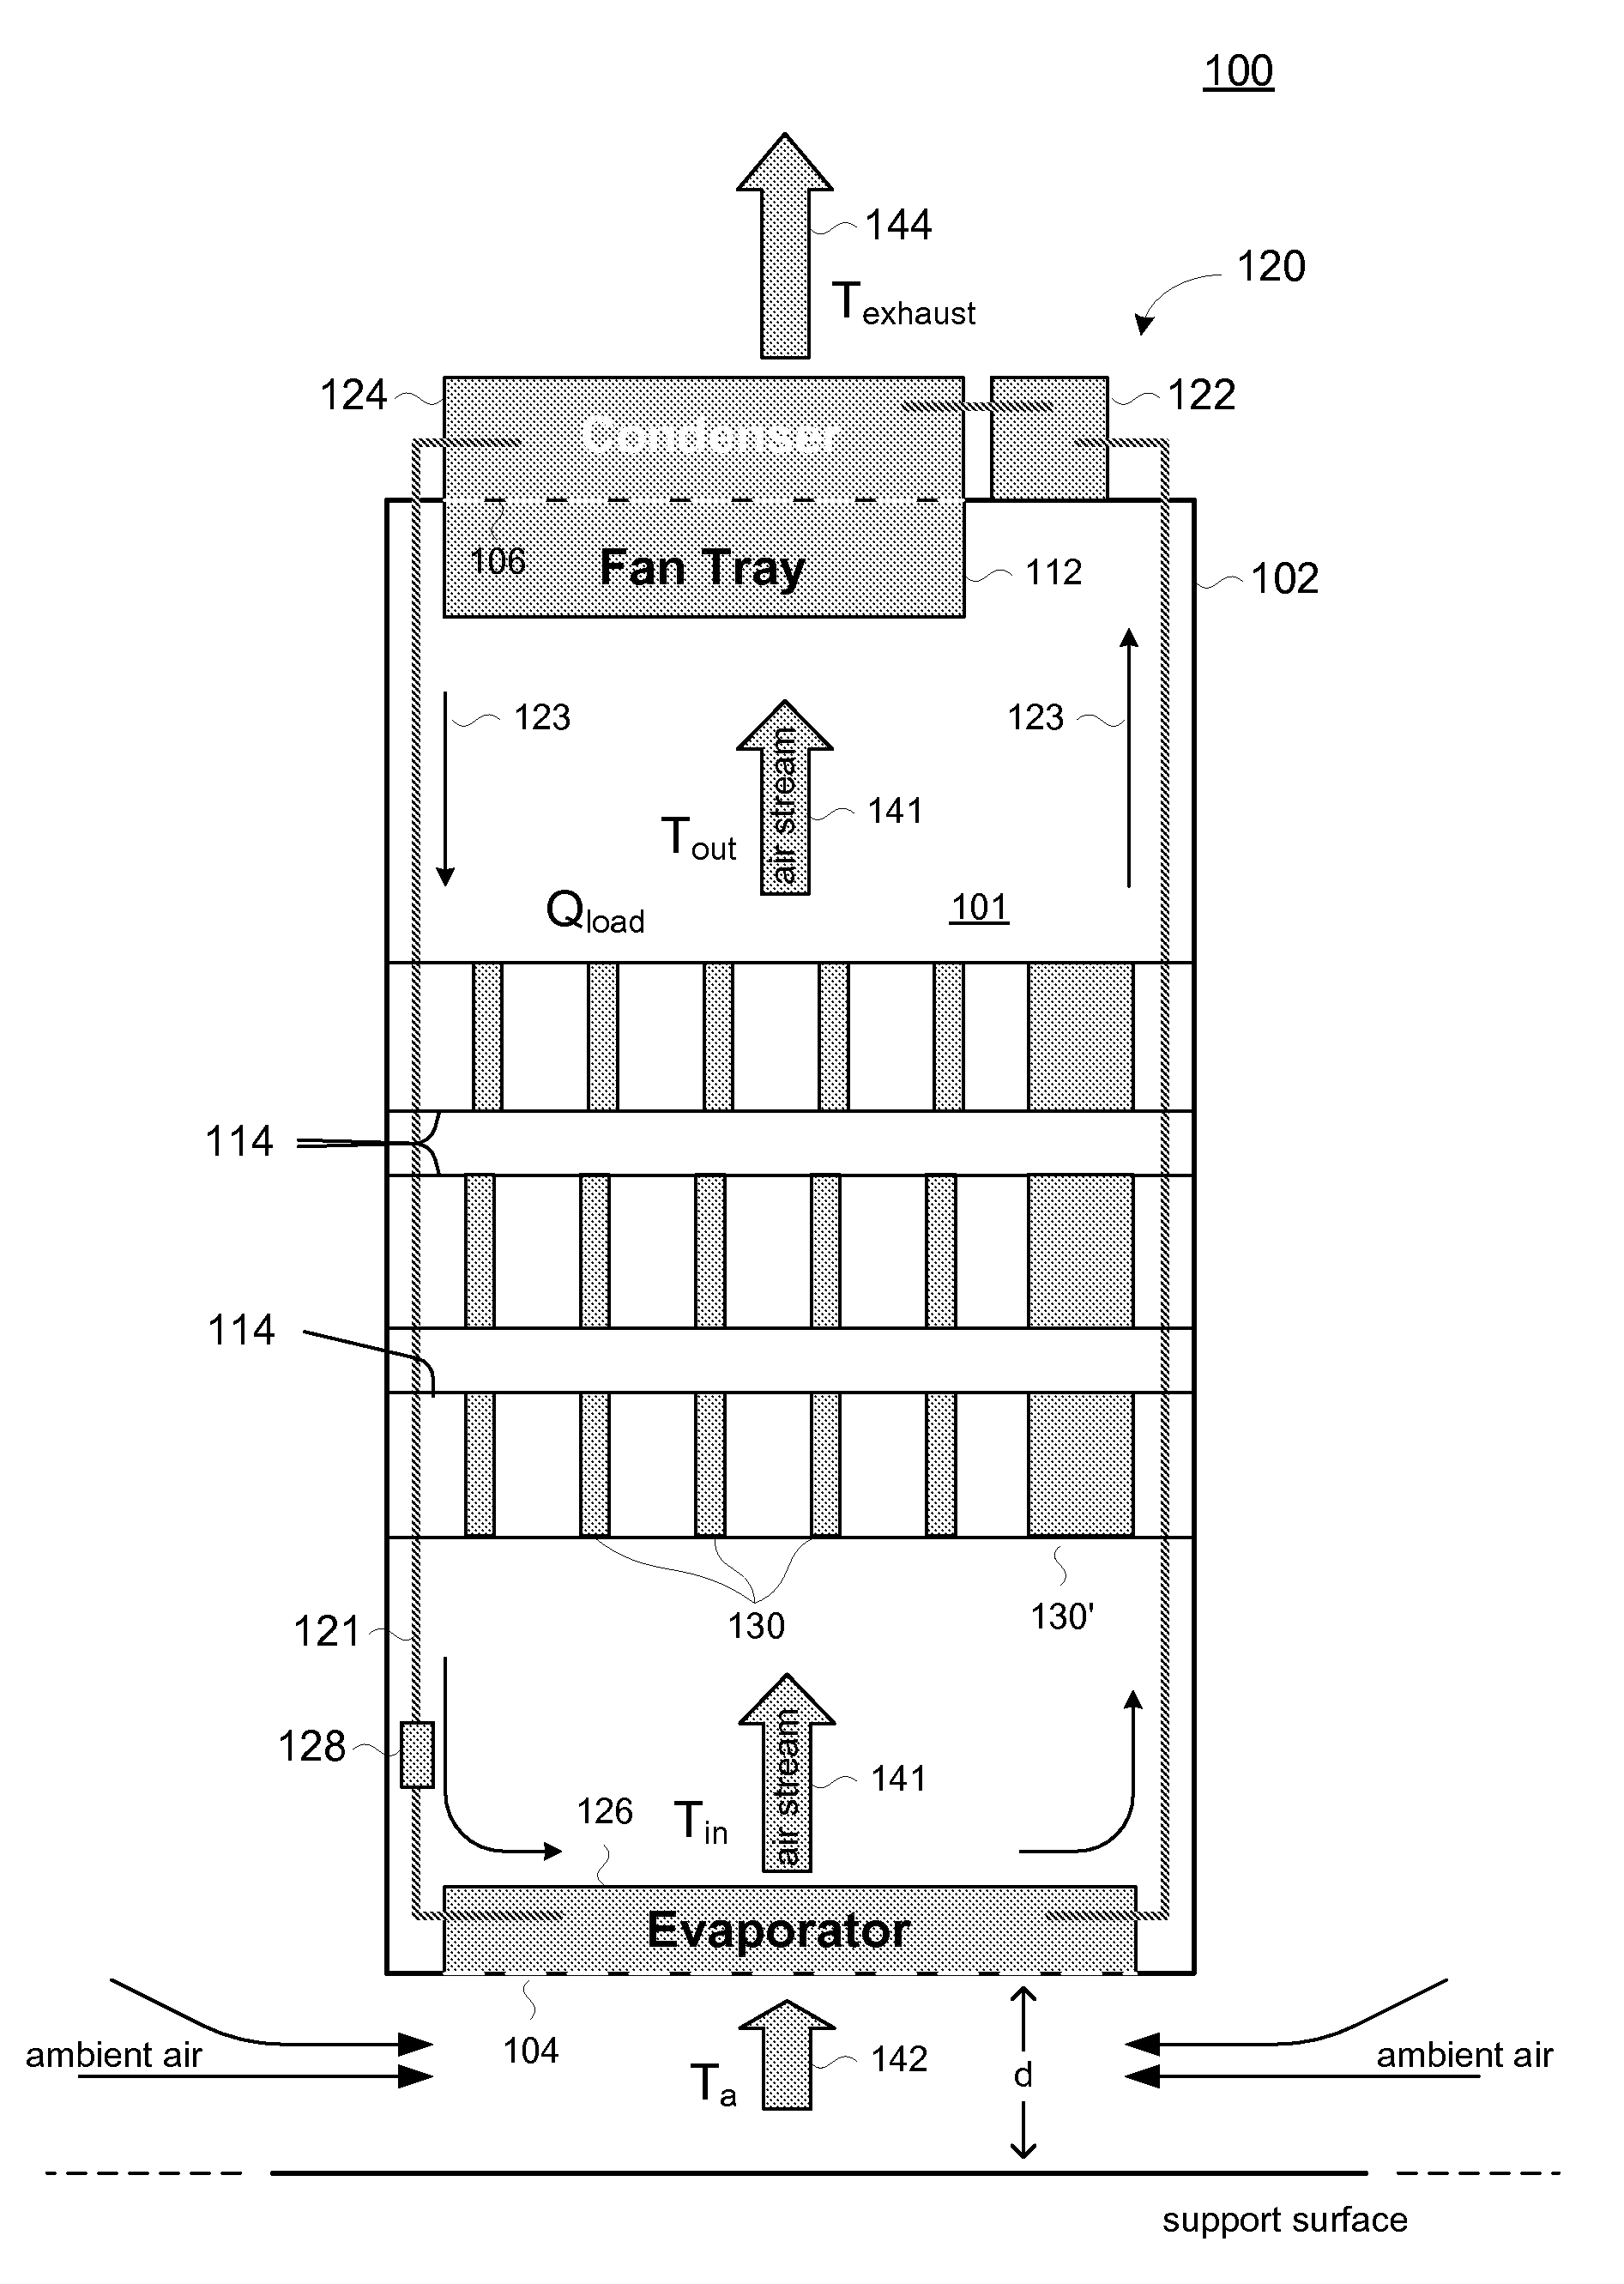 Flow-Through Air Conditioning for Electronics Racks